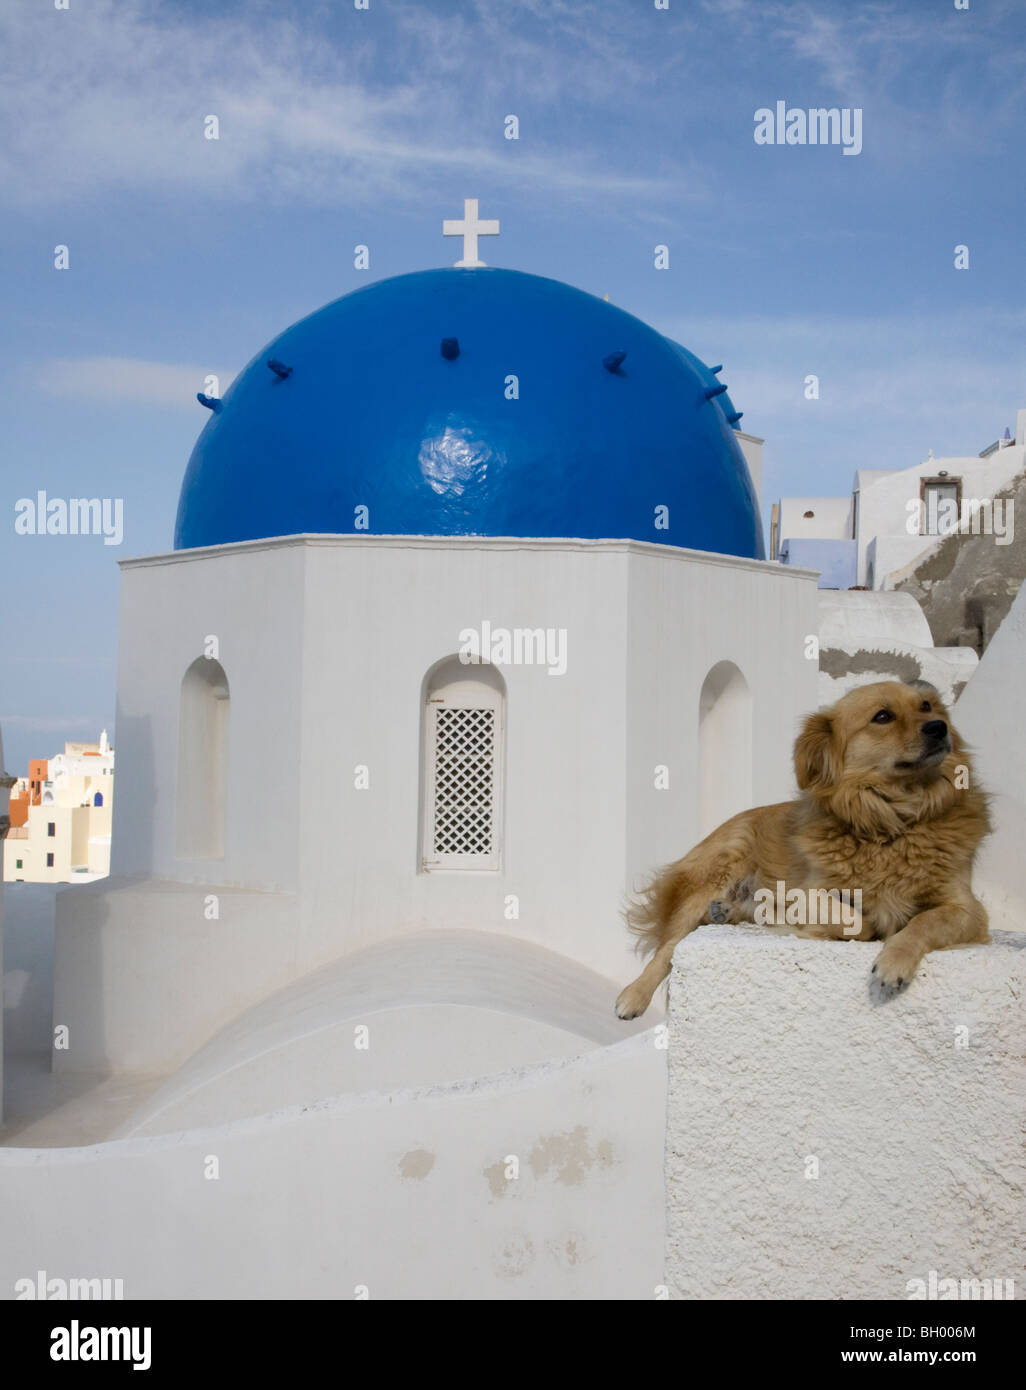 Dog relaxing on white gatepost in front of blue-domed church on Santorini Island, Greece Stock Photo